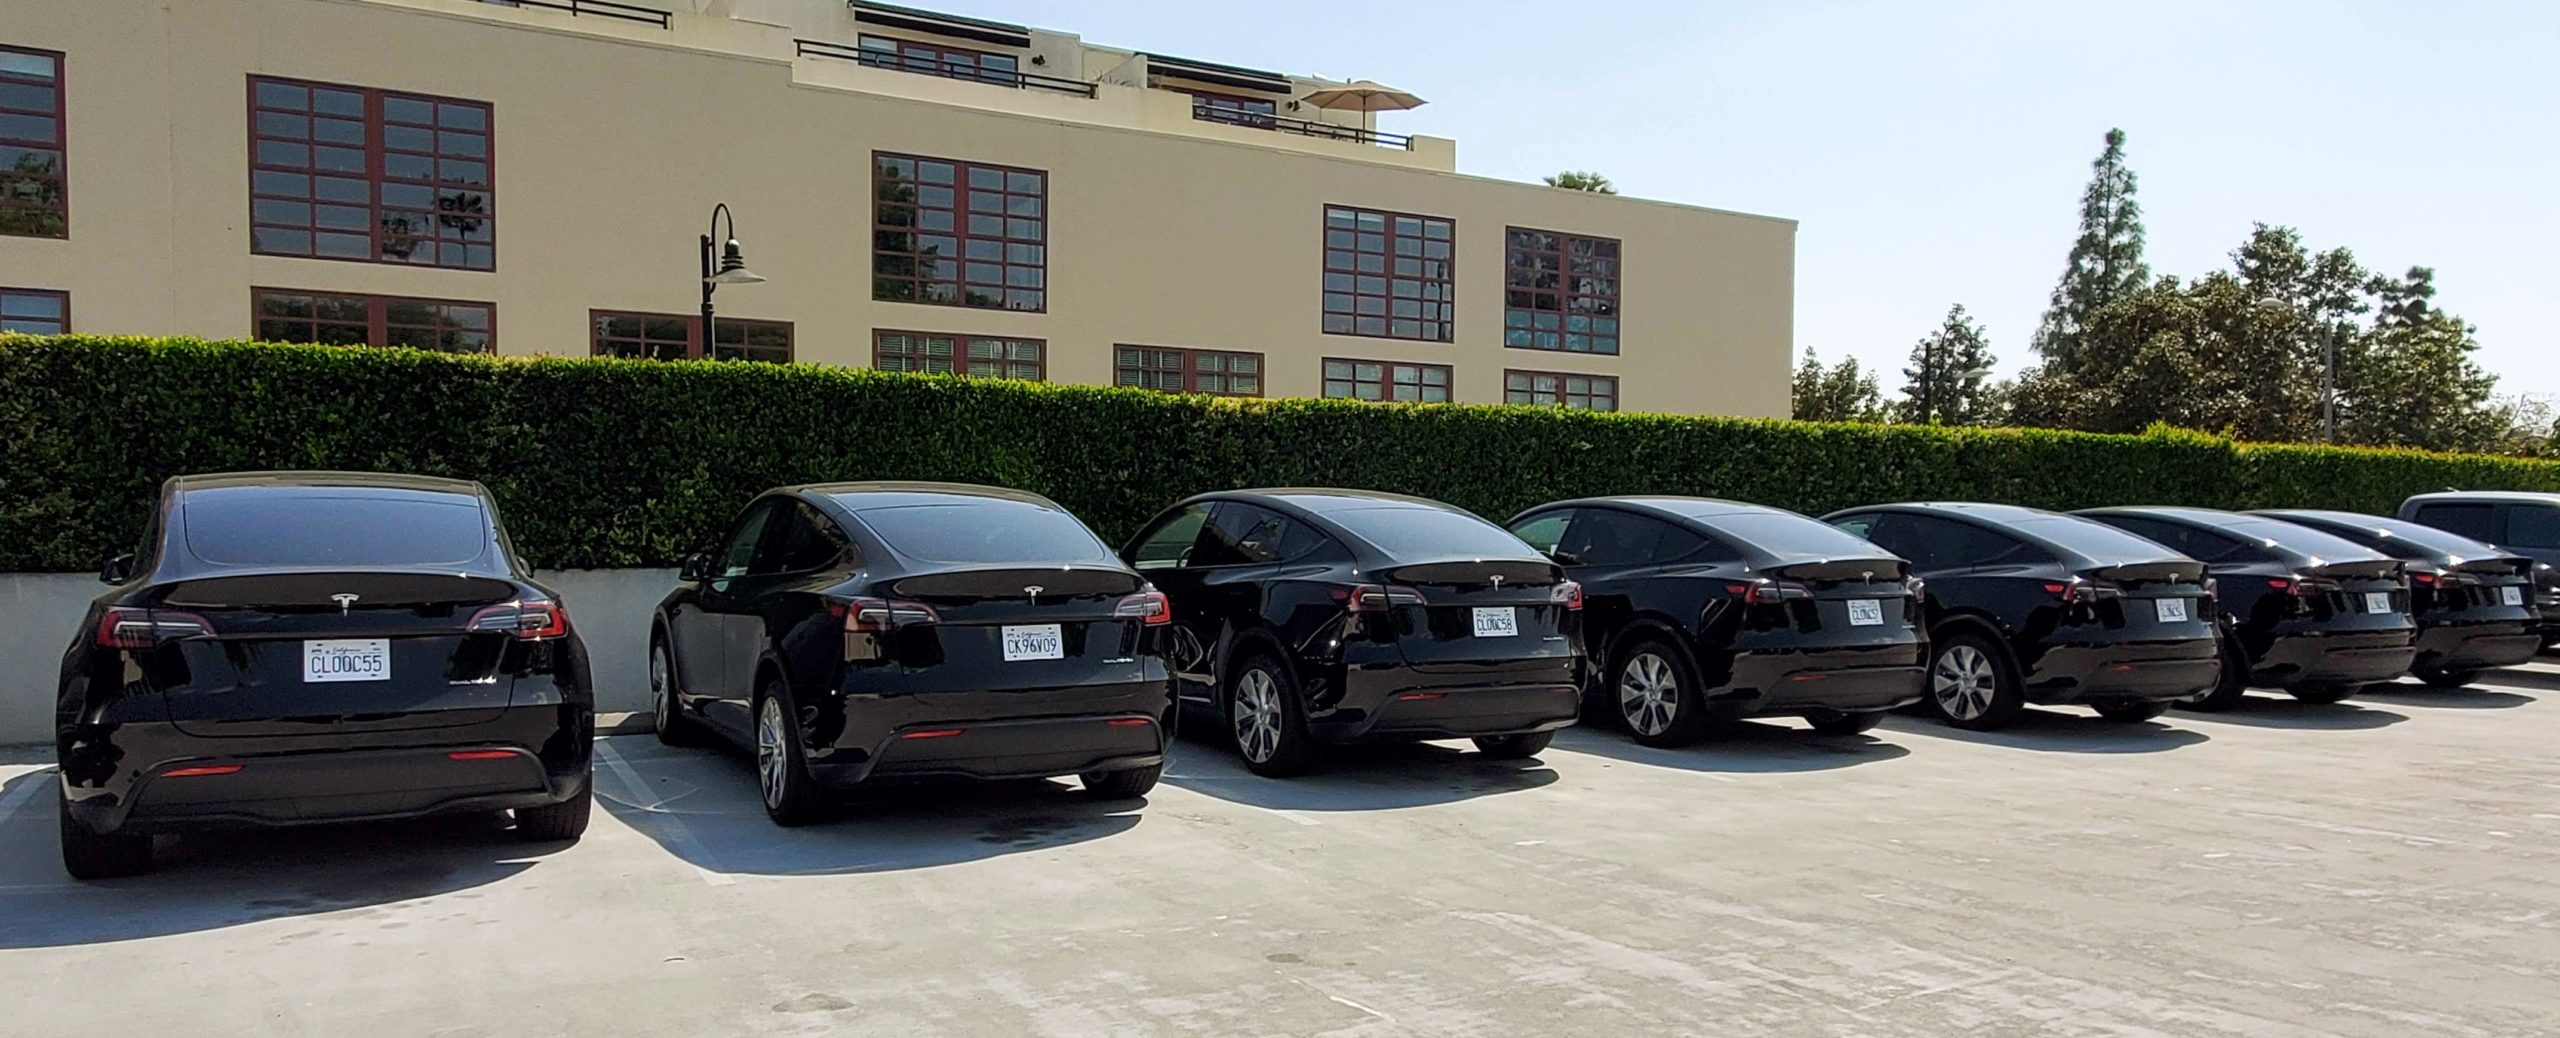 PHOTO: TESLA - Tina Kistinger | The South Pasadenan News | Newly delivered Tesla Model 3's near the South Pasadena Police Station. The next steps include converting the vehicles into fully operational police units, and installing the charging stations.